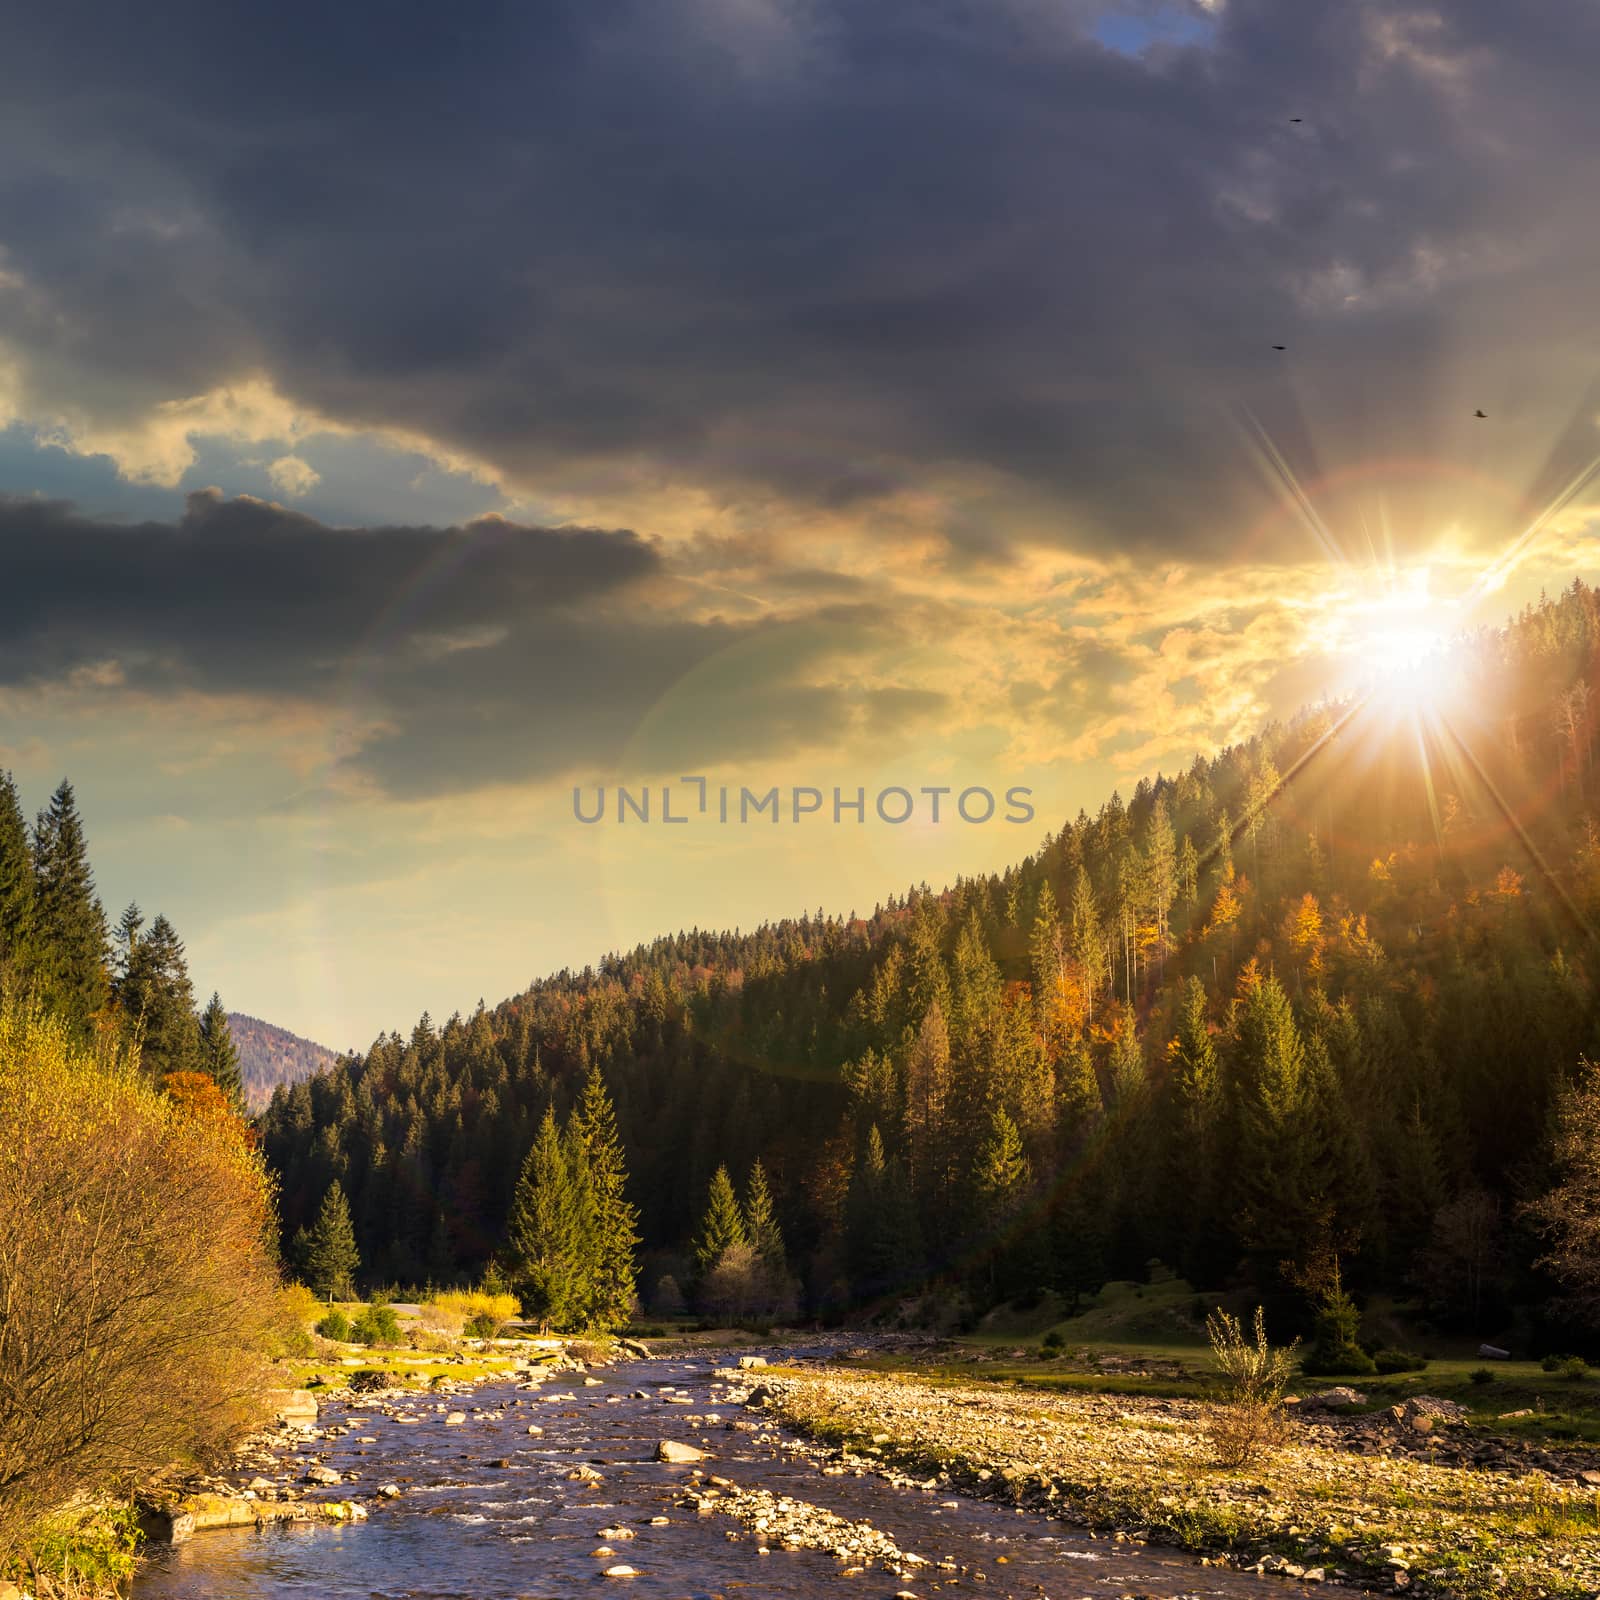 mountain river with stones in the forest near the mountain slope at sunset